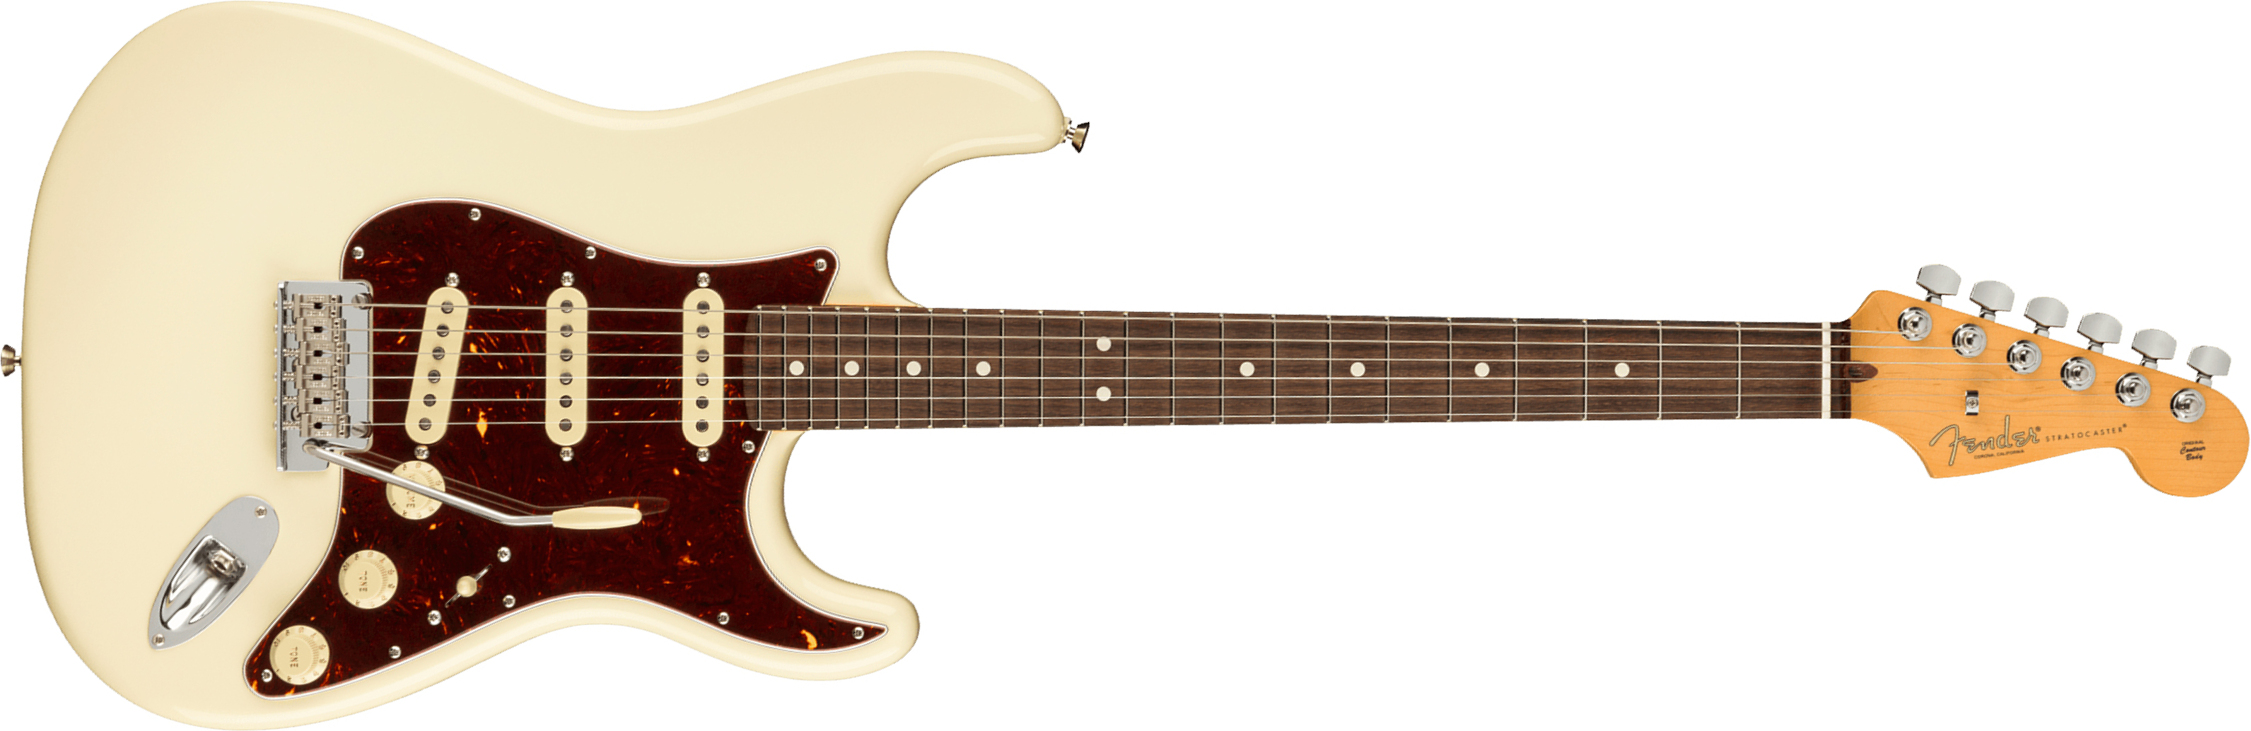 Fender Strat American Professional Ii Usa Rw - Olympic White - Guitare Électrique Forme Str - Main picture